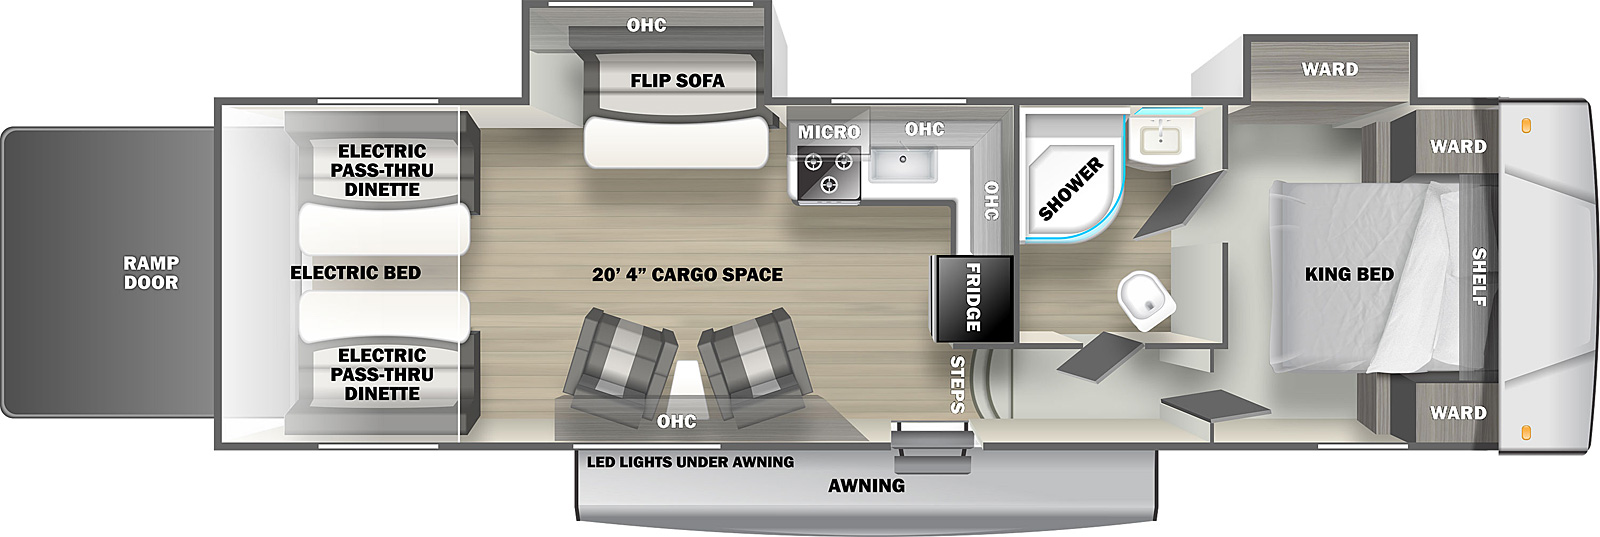 The Shockwave 33FWGDX is a toy hauler fifth wheel with one entry door, a rear ramp door, two slides on the off-door side, and 18' awning on the exterior. Inside, a walkaround king bed is located in the front of the unit, with wardrobe cabinets on either side, cabinets above the head of the bed, and a wardrobe vanity in a slideout on the off-door bedroom wall. There are two doors in the bedroom, one leading into the bathroom and one opening to a short hallway with steps leading into the main living area. The bathroom contains a sink, medicine cabinet, commode, and radius glass shower. The kitchen area is located on the opposite side of the bathroom wall, which faces the rear of the unit. There is an L-shaped countertop, refrigerator, sink, stovetop and oven, with cabinets and a microwave oven mounted overhead. Next to the kitchen area on the off-door wall is a slideout containing a flip sofa with half dinette table. Across from the slideout on the door side are additional overhead cabinets and a pair of upholstered chairs with small table between them. In the rear of the unit are two flip sofa benches, one on either side, with a split dinette table between them. These convert to a standard electric bed. This trailer provides 20' 4" of interior cargo space.